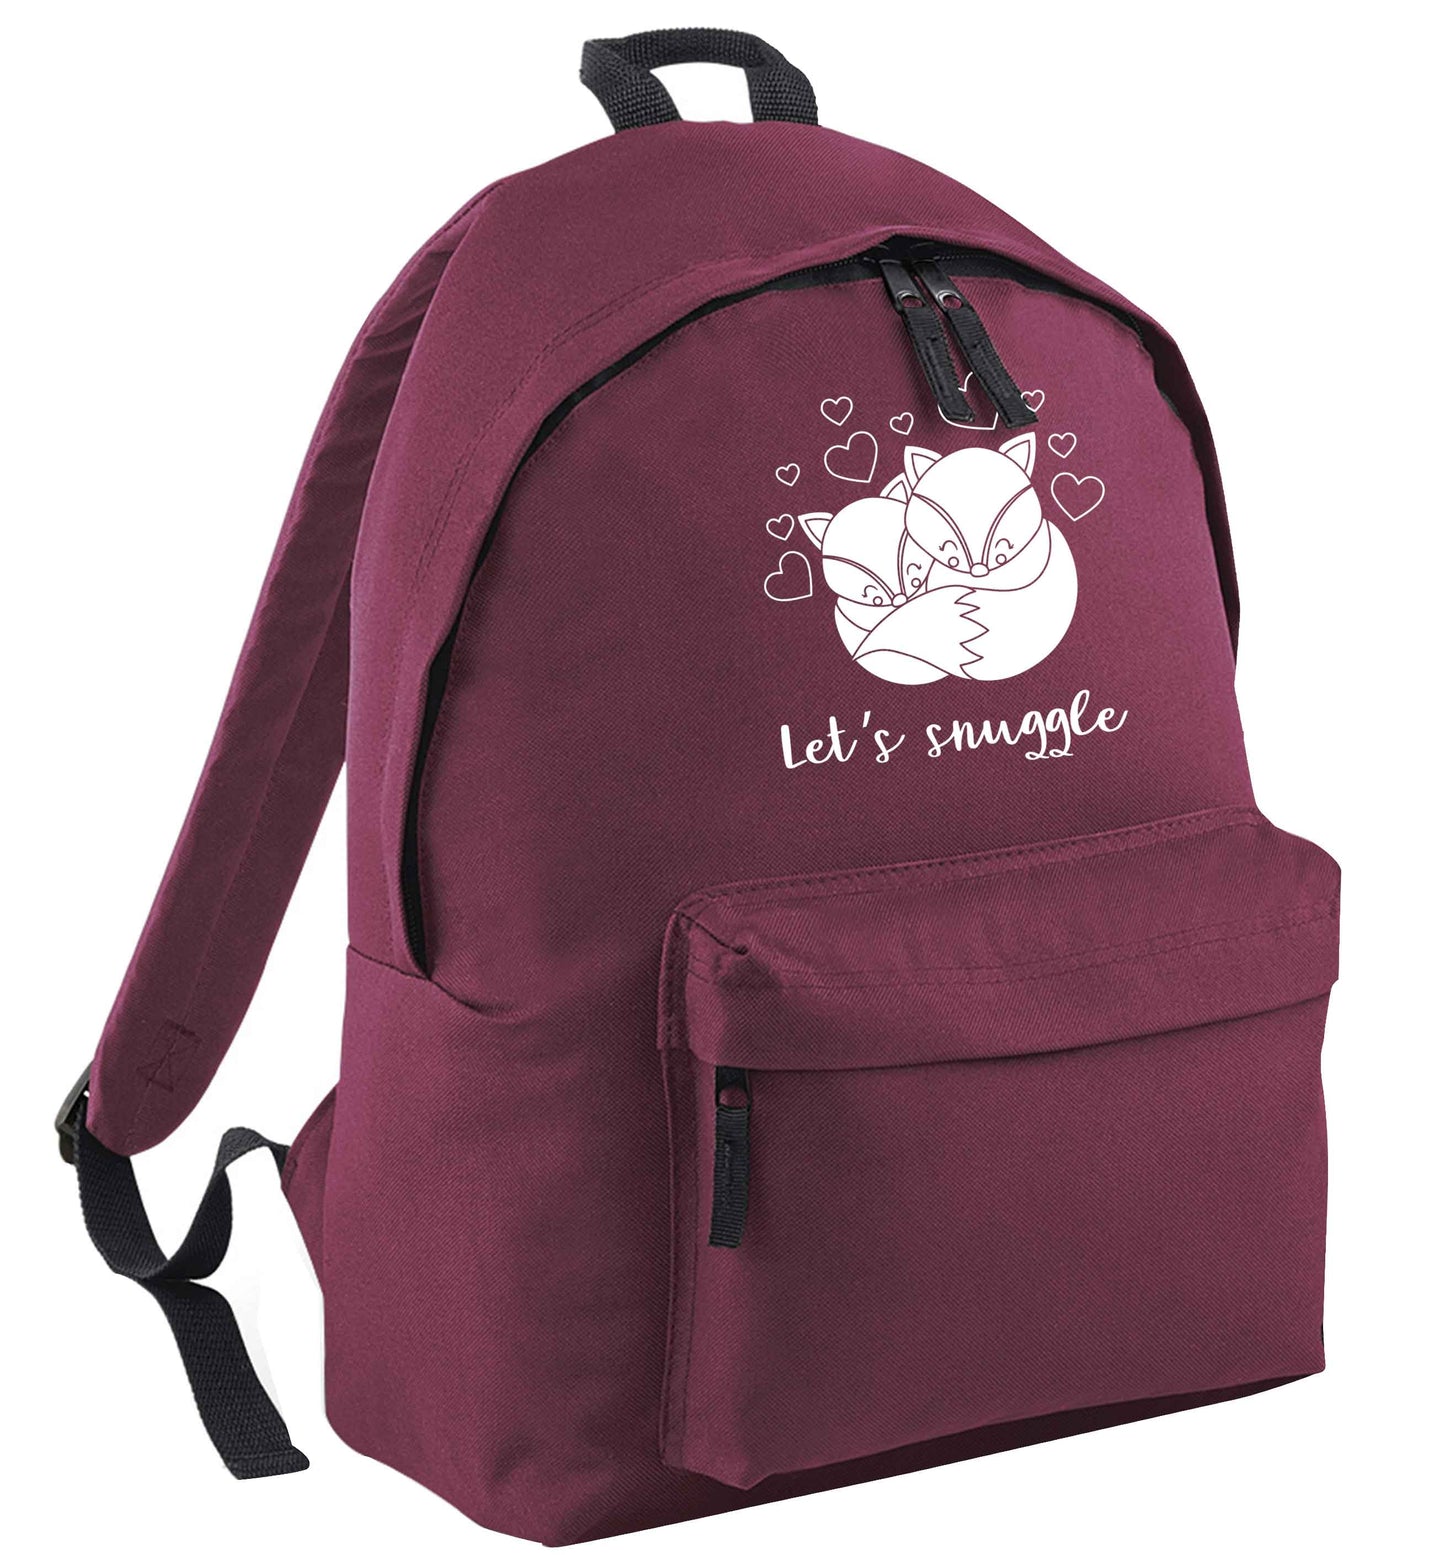 Let's snuggle maroon adults backpack